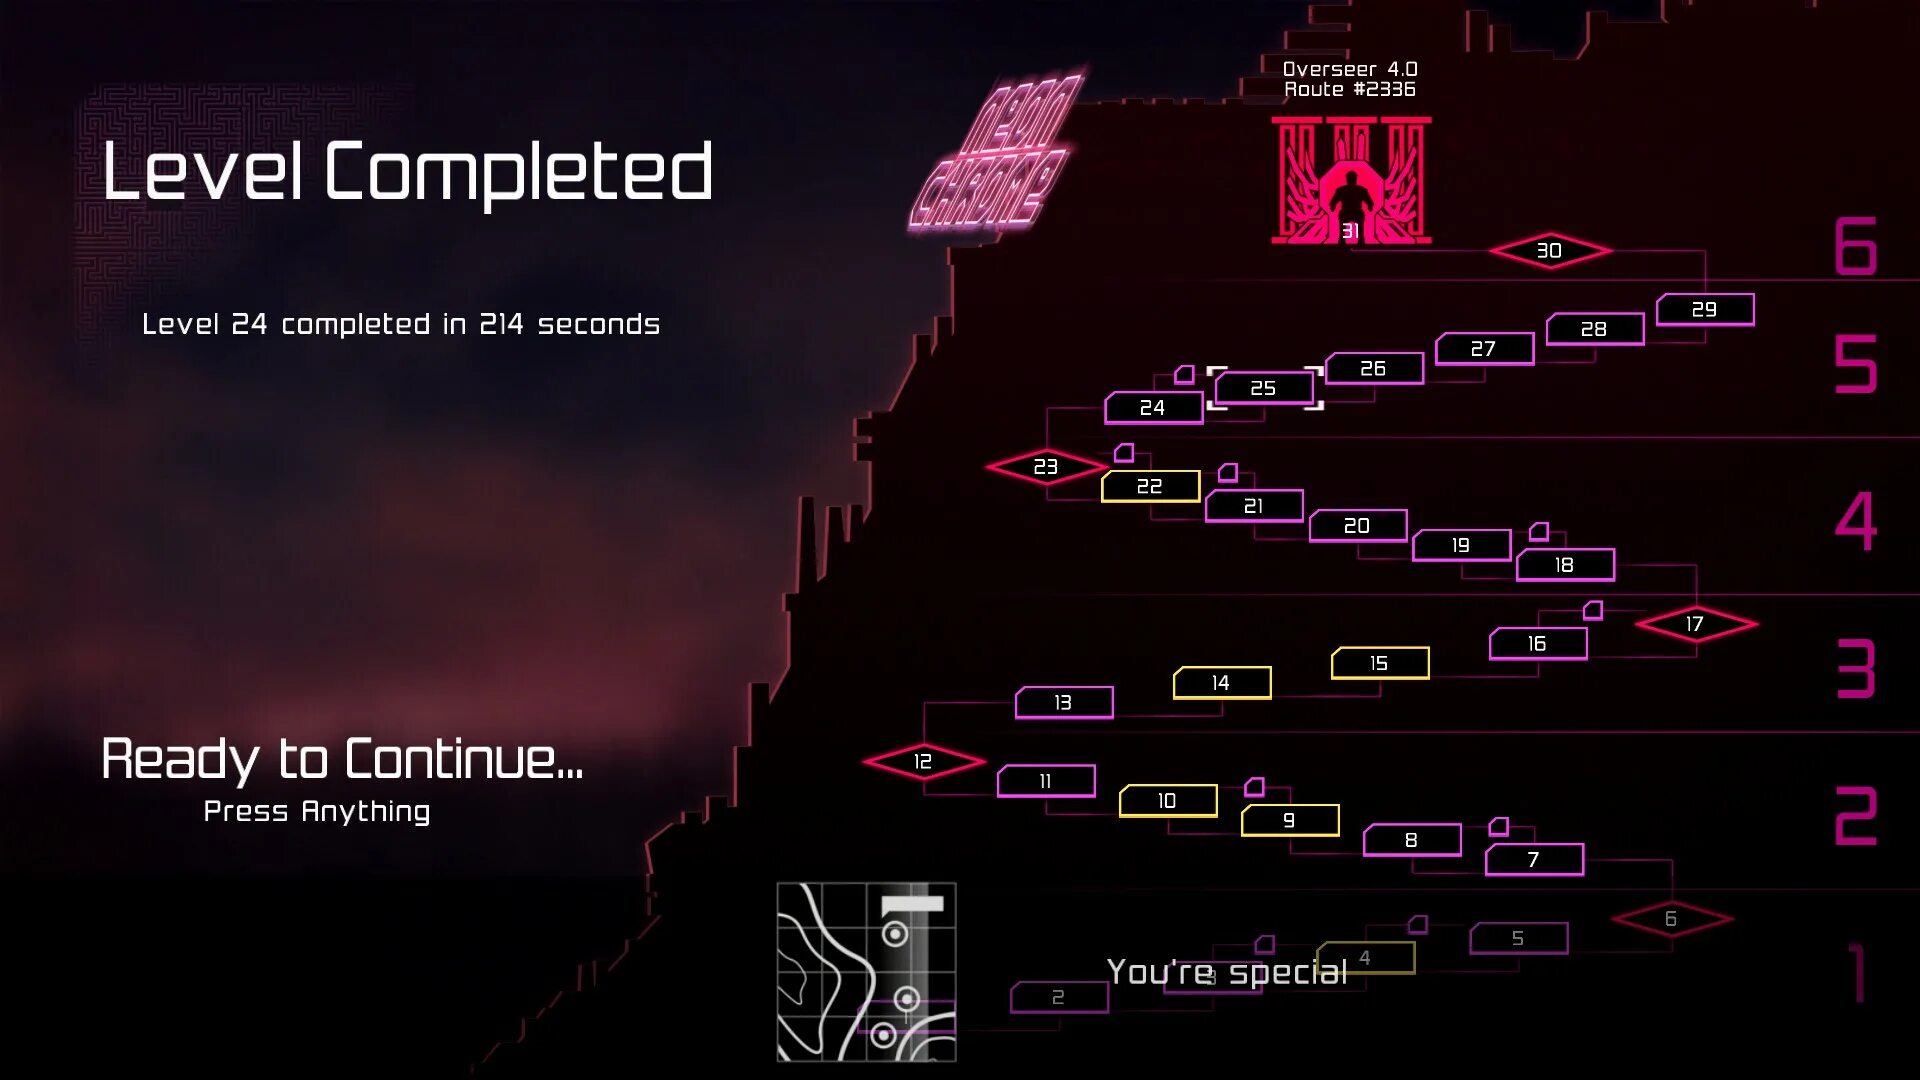 Level complete. Complete first уровни. Neon Chrome Assassin. Track of Levels in the game.